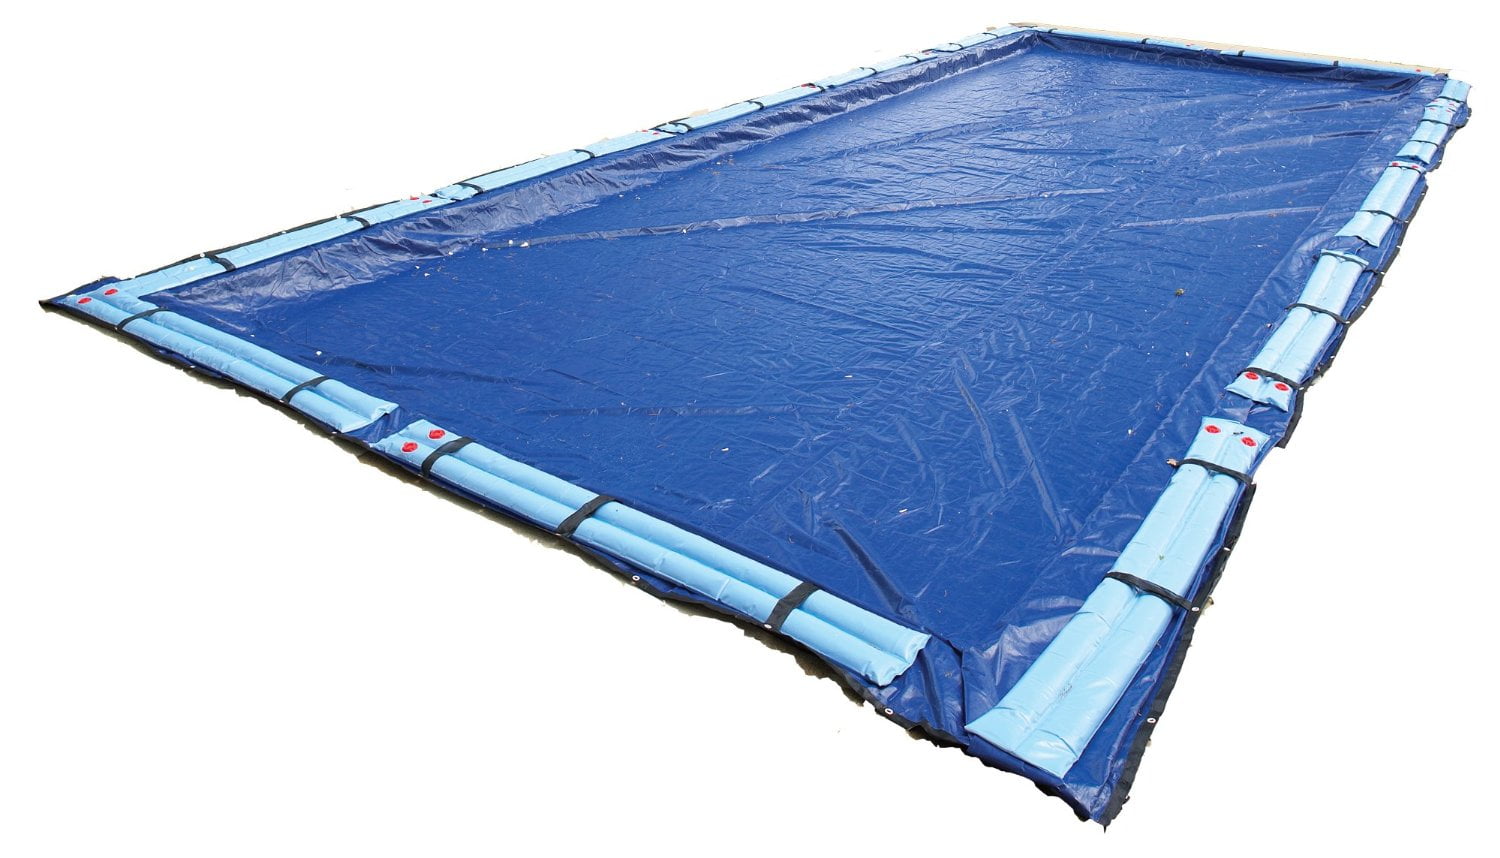 Winter Pool Cover Inground 20X40 Ft Rectangle Arctic Armor 8Yr Warranty w/ Tubes 